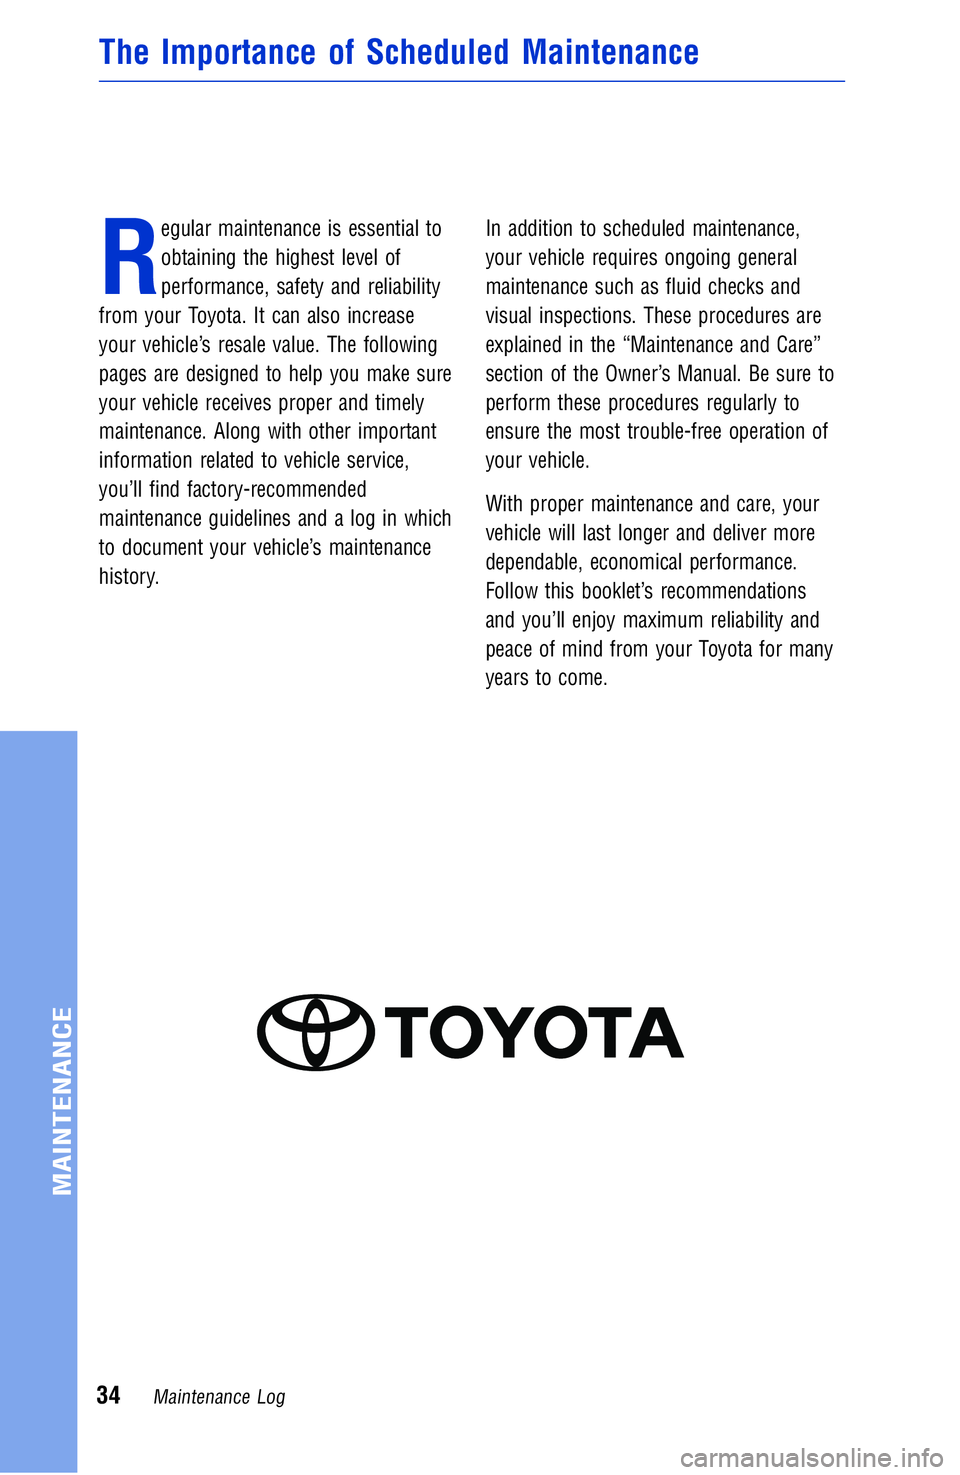 TOYOTA YARIS iA 2017  Warranties & Maintenance Guides (in English) R
egular maintenance is essential to
obtaining the highest level of
performance, safety and reliability
from your Toyota. It can also increase
your vehicle’s resale value. The following
pages are de